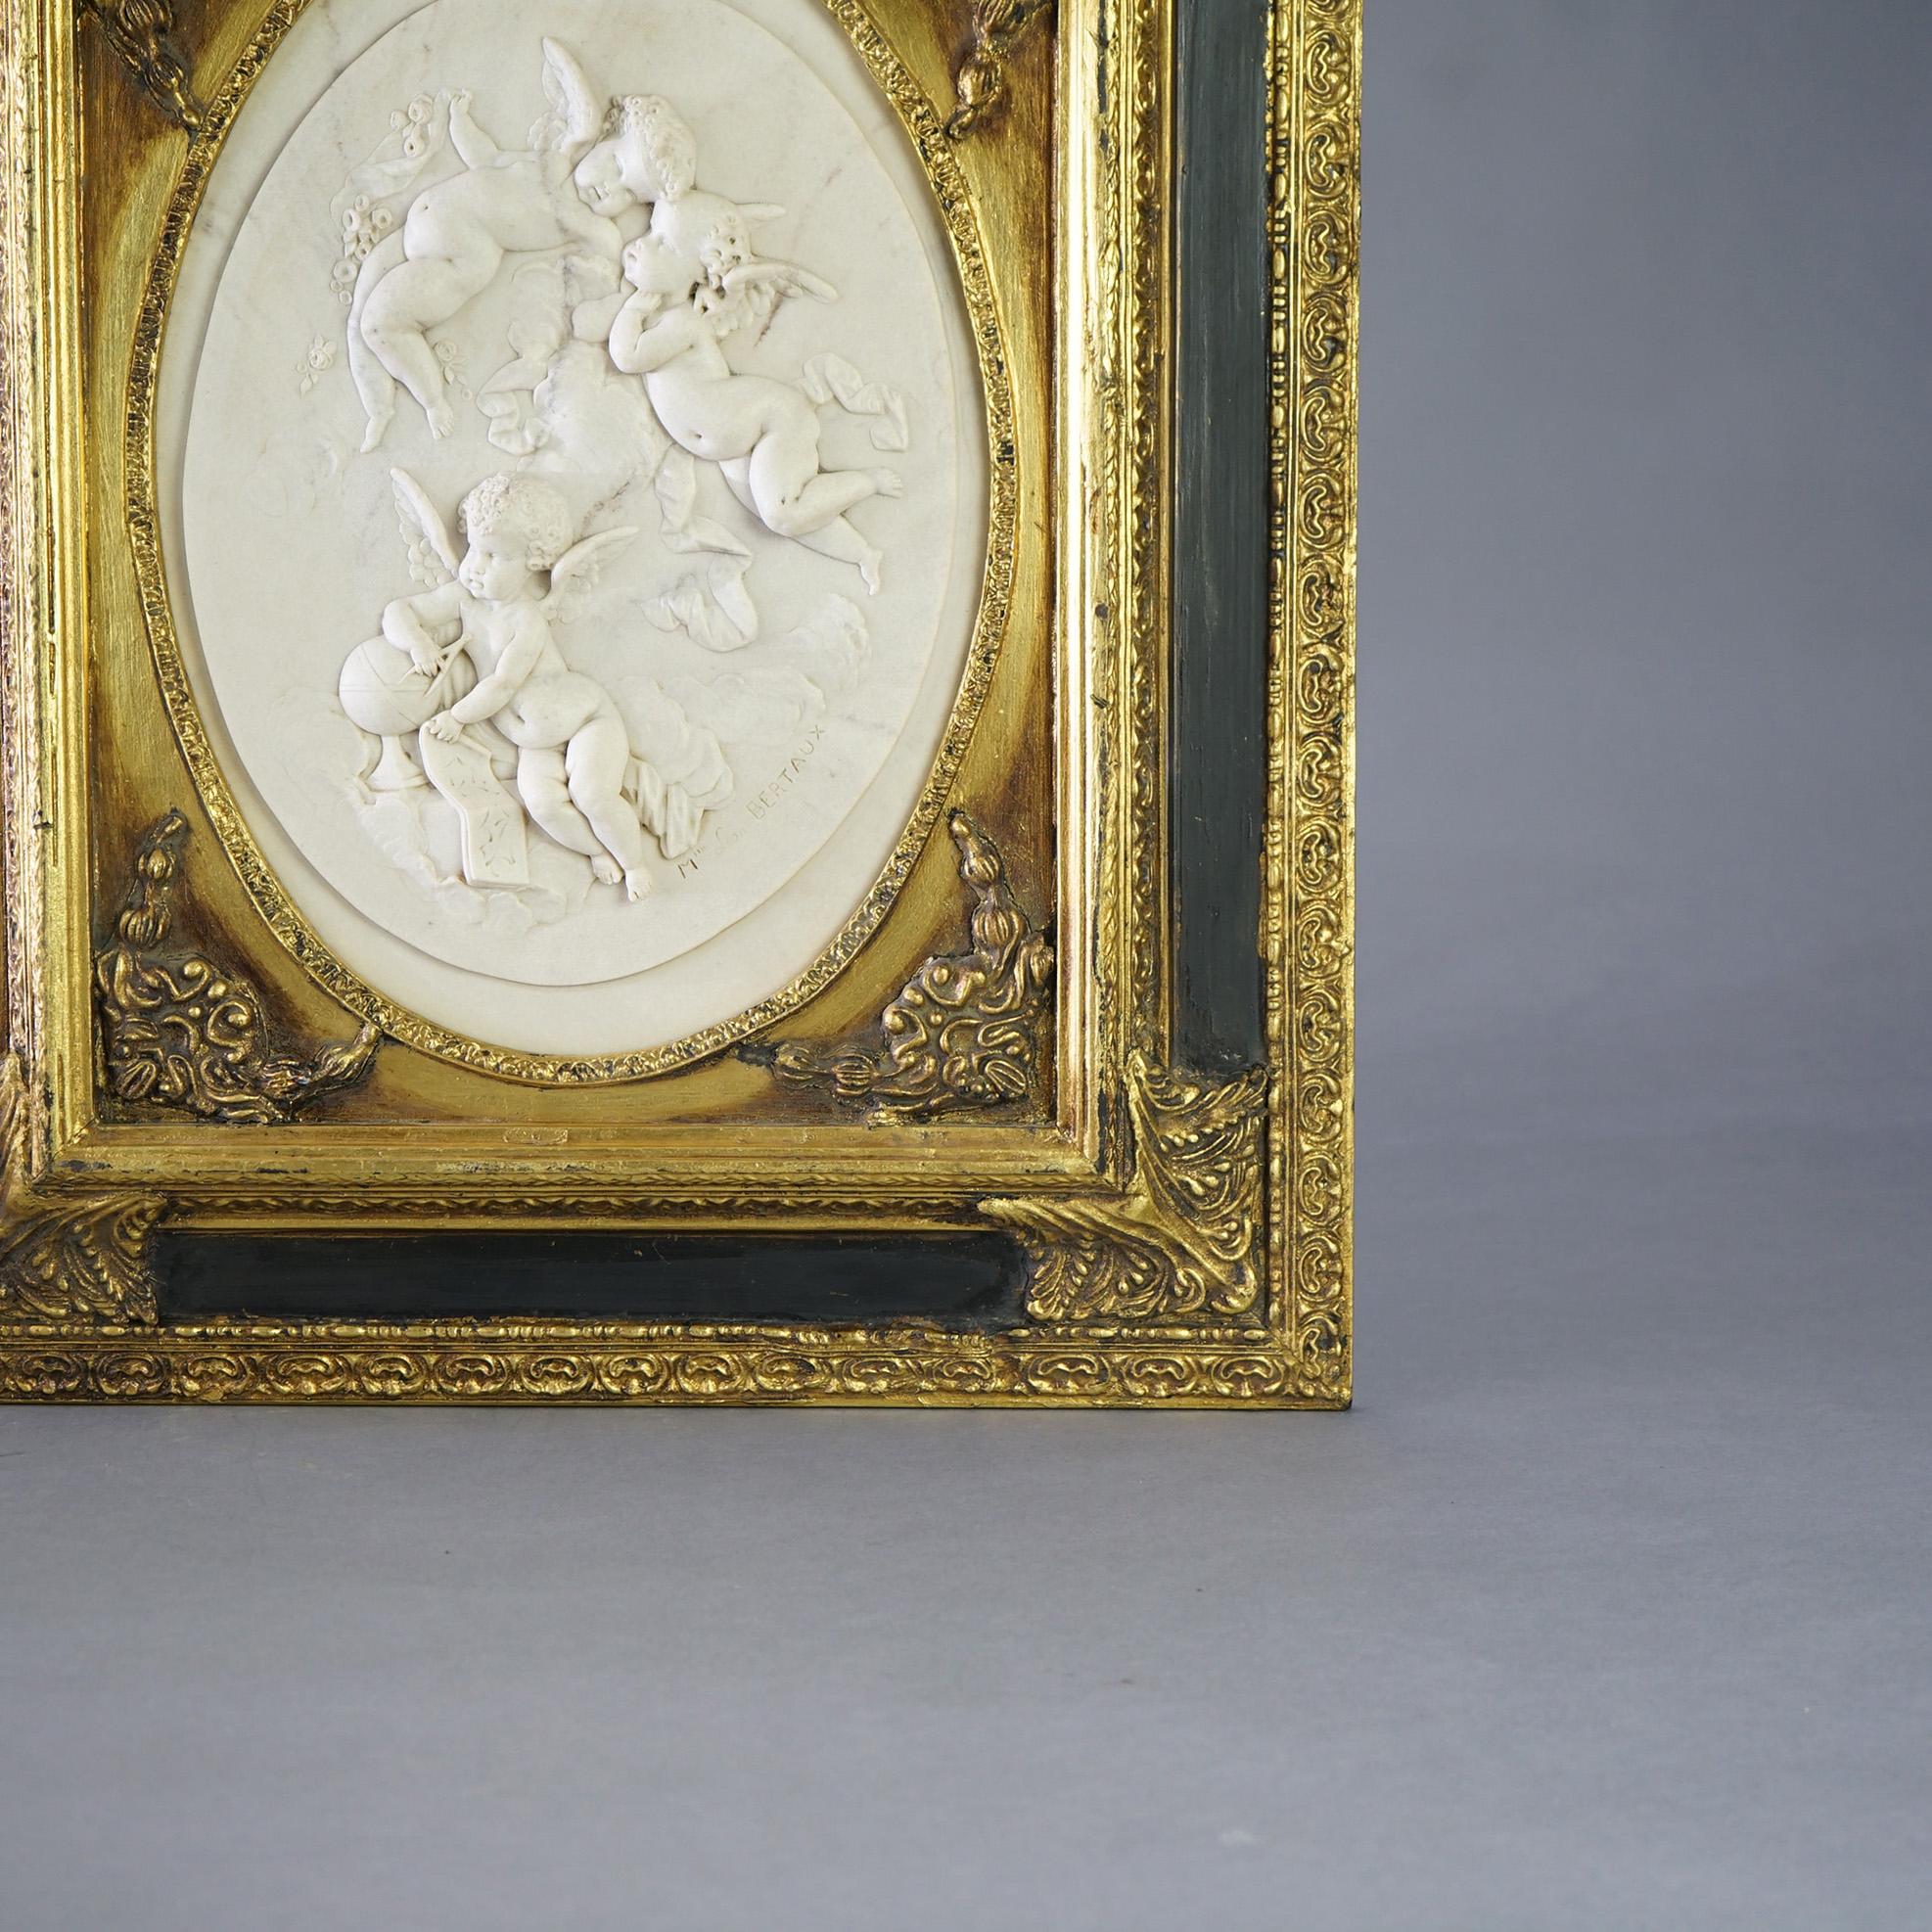 Antique Classical Carved Marble Plaque with Winged Cherubs by Bertaux 19th C For Sale 2